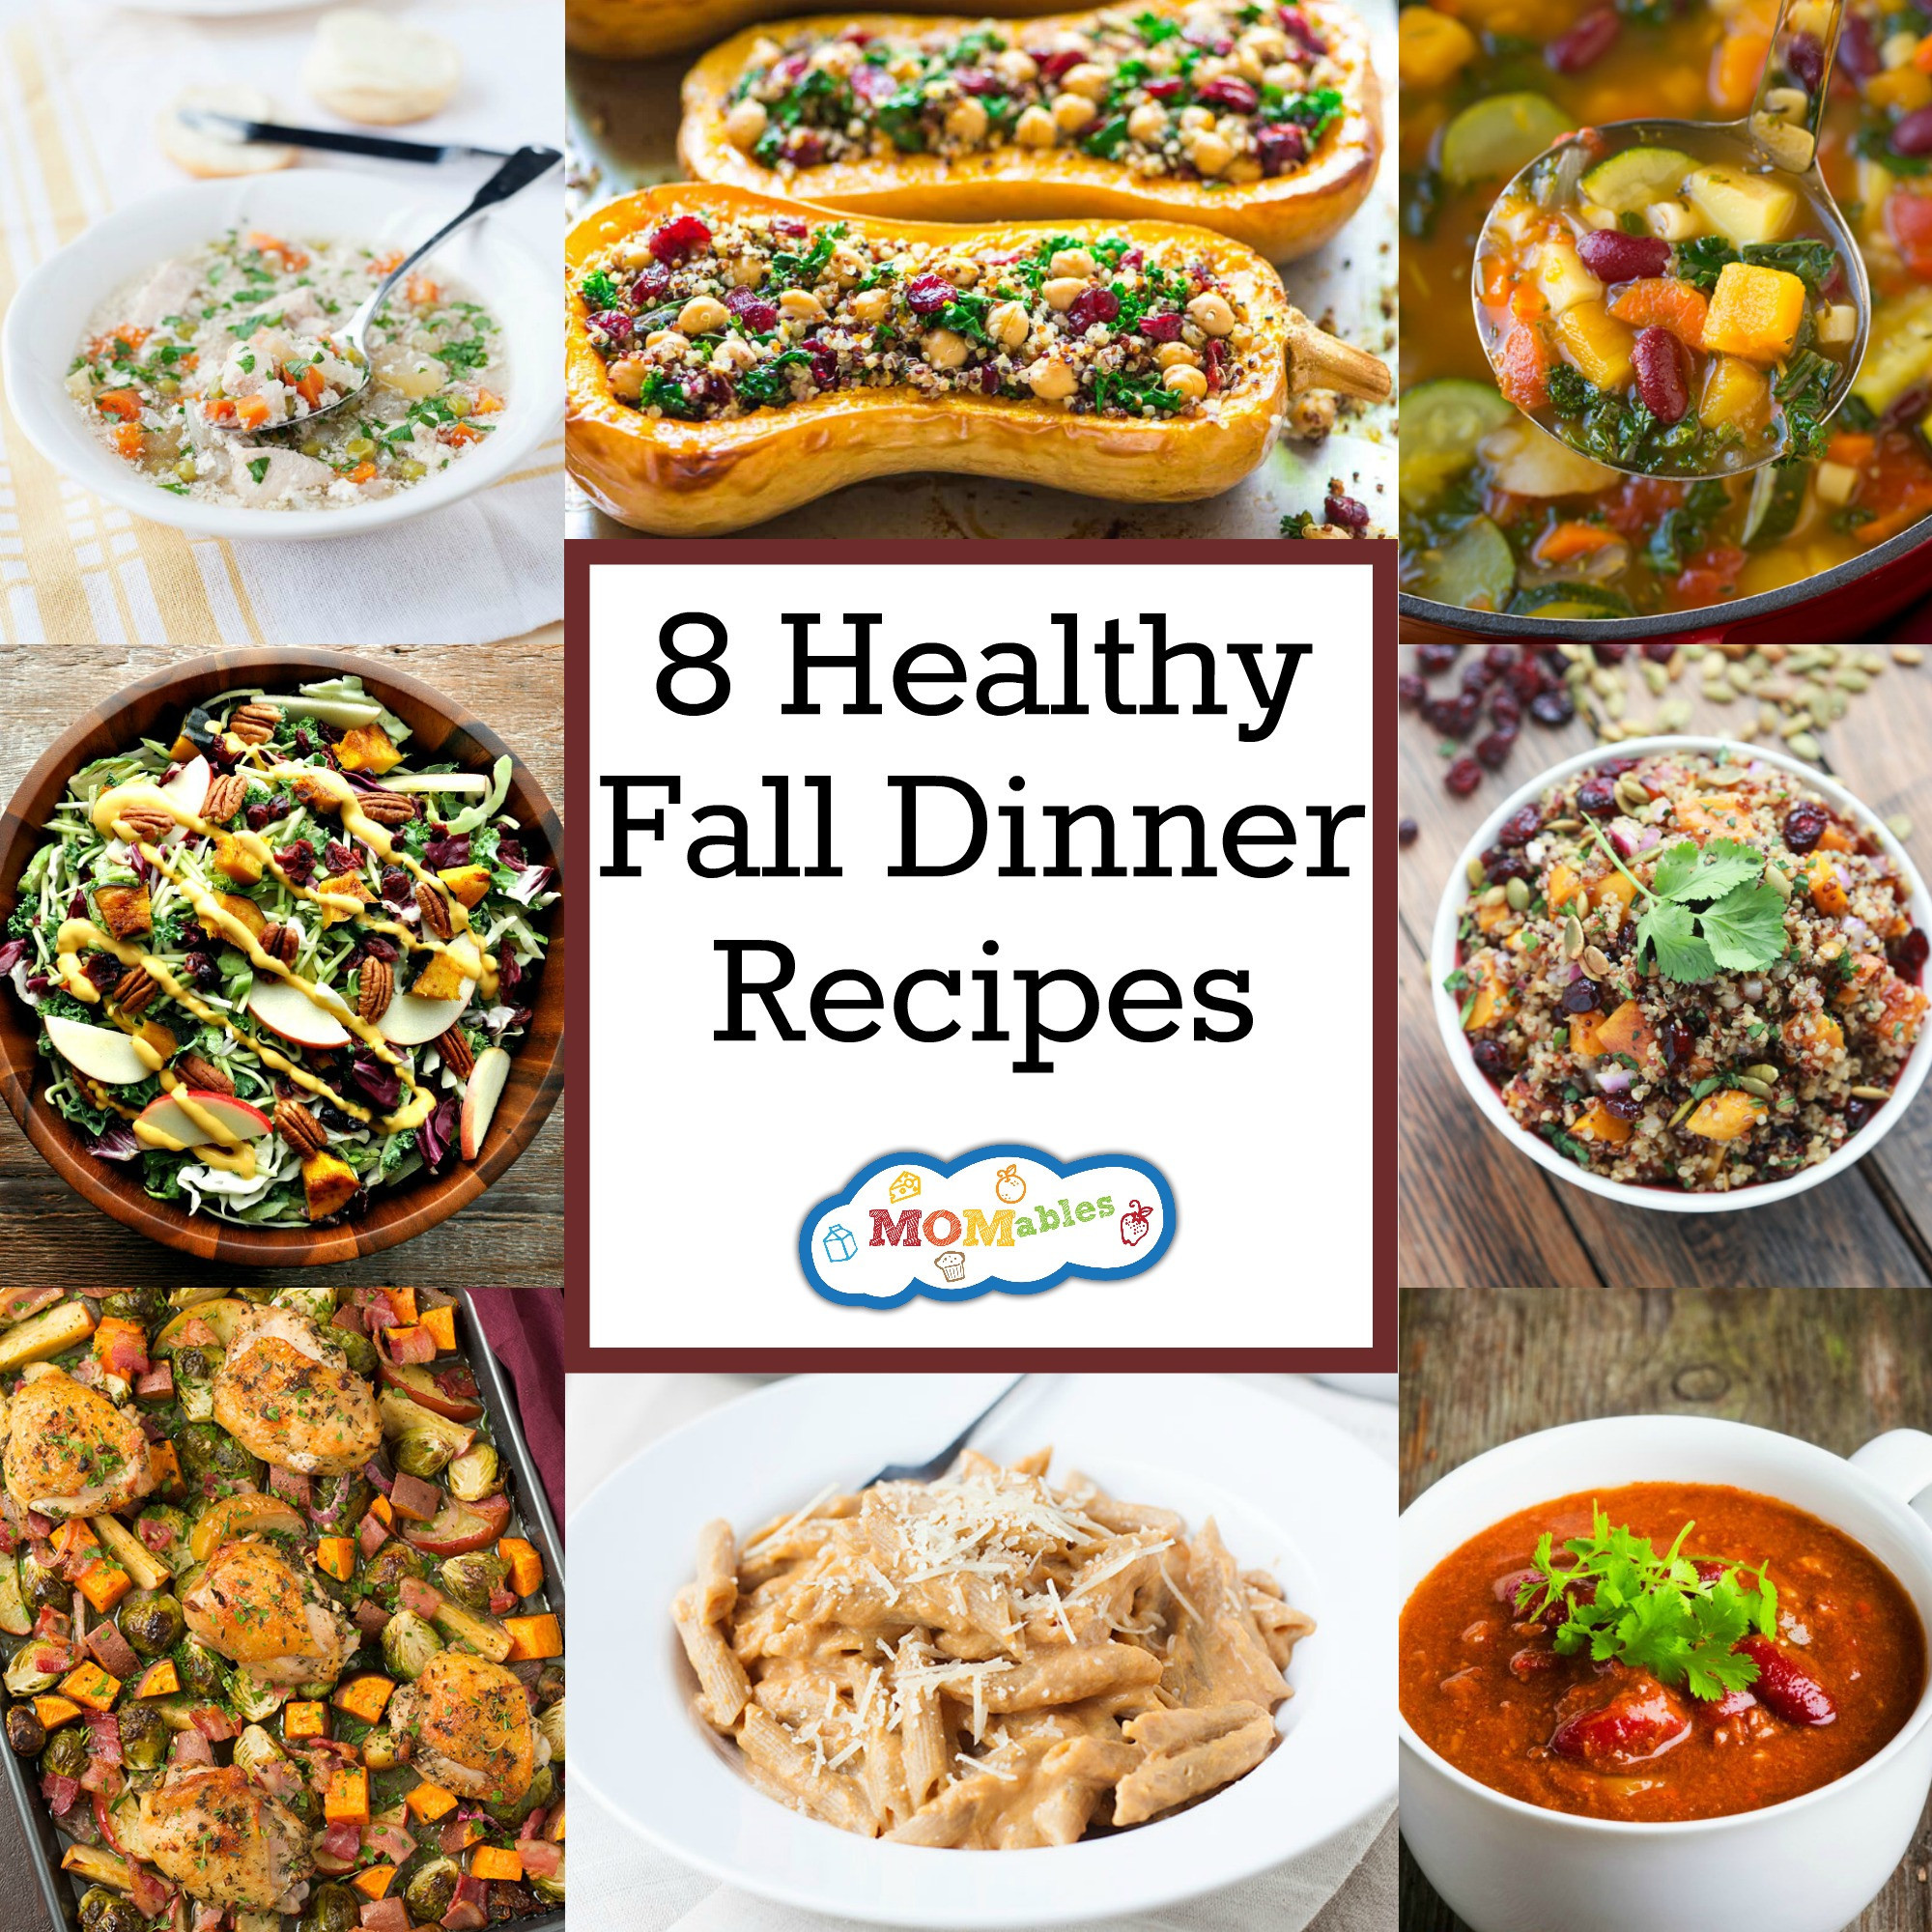 Healthy Fall Dinner Recipes
 The Best Ideas for Good Fall Dinners Most Popular Ideas